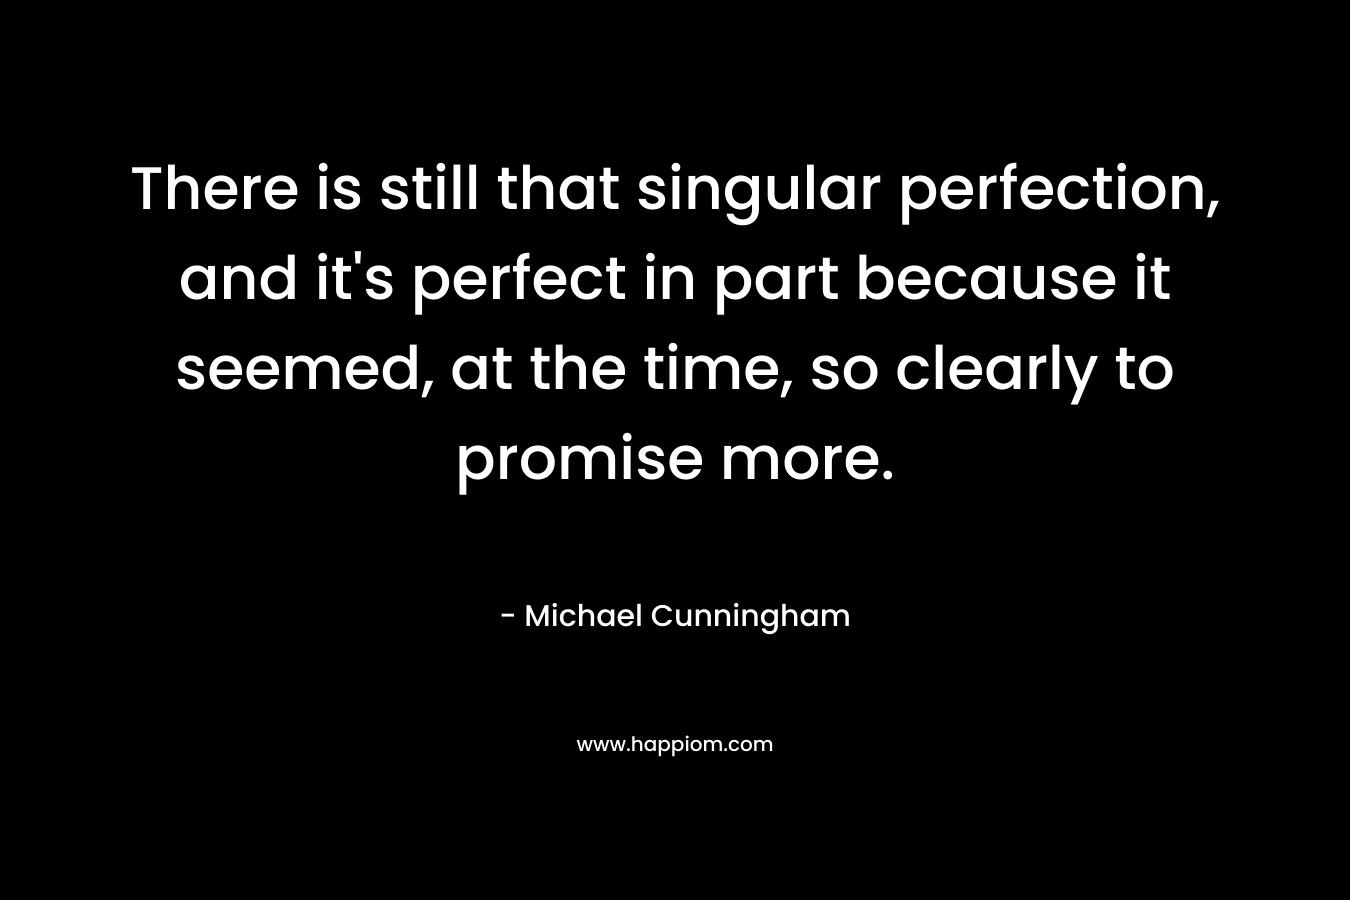 There is still that singular perfection, and it’s perfect in part because it seemed, at the time, so clearly to promise more. – Michael Cunningham